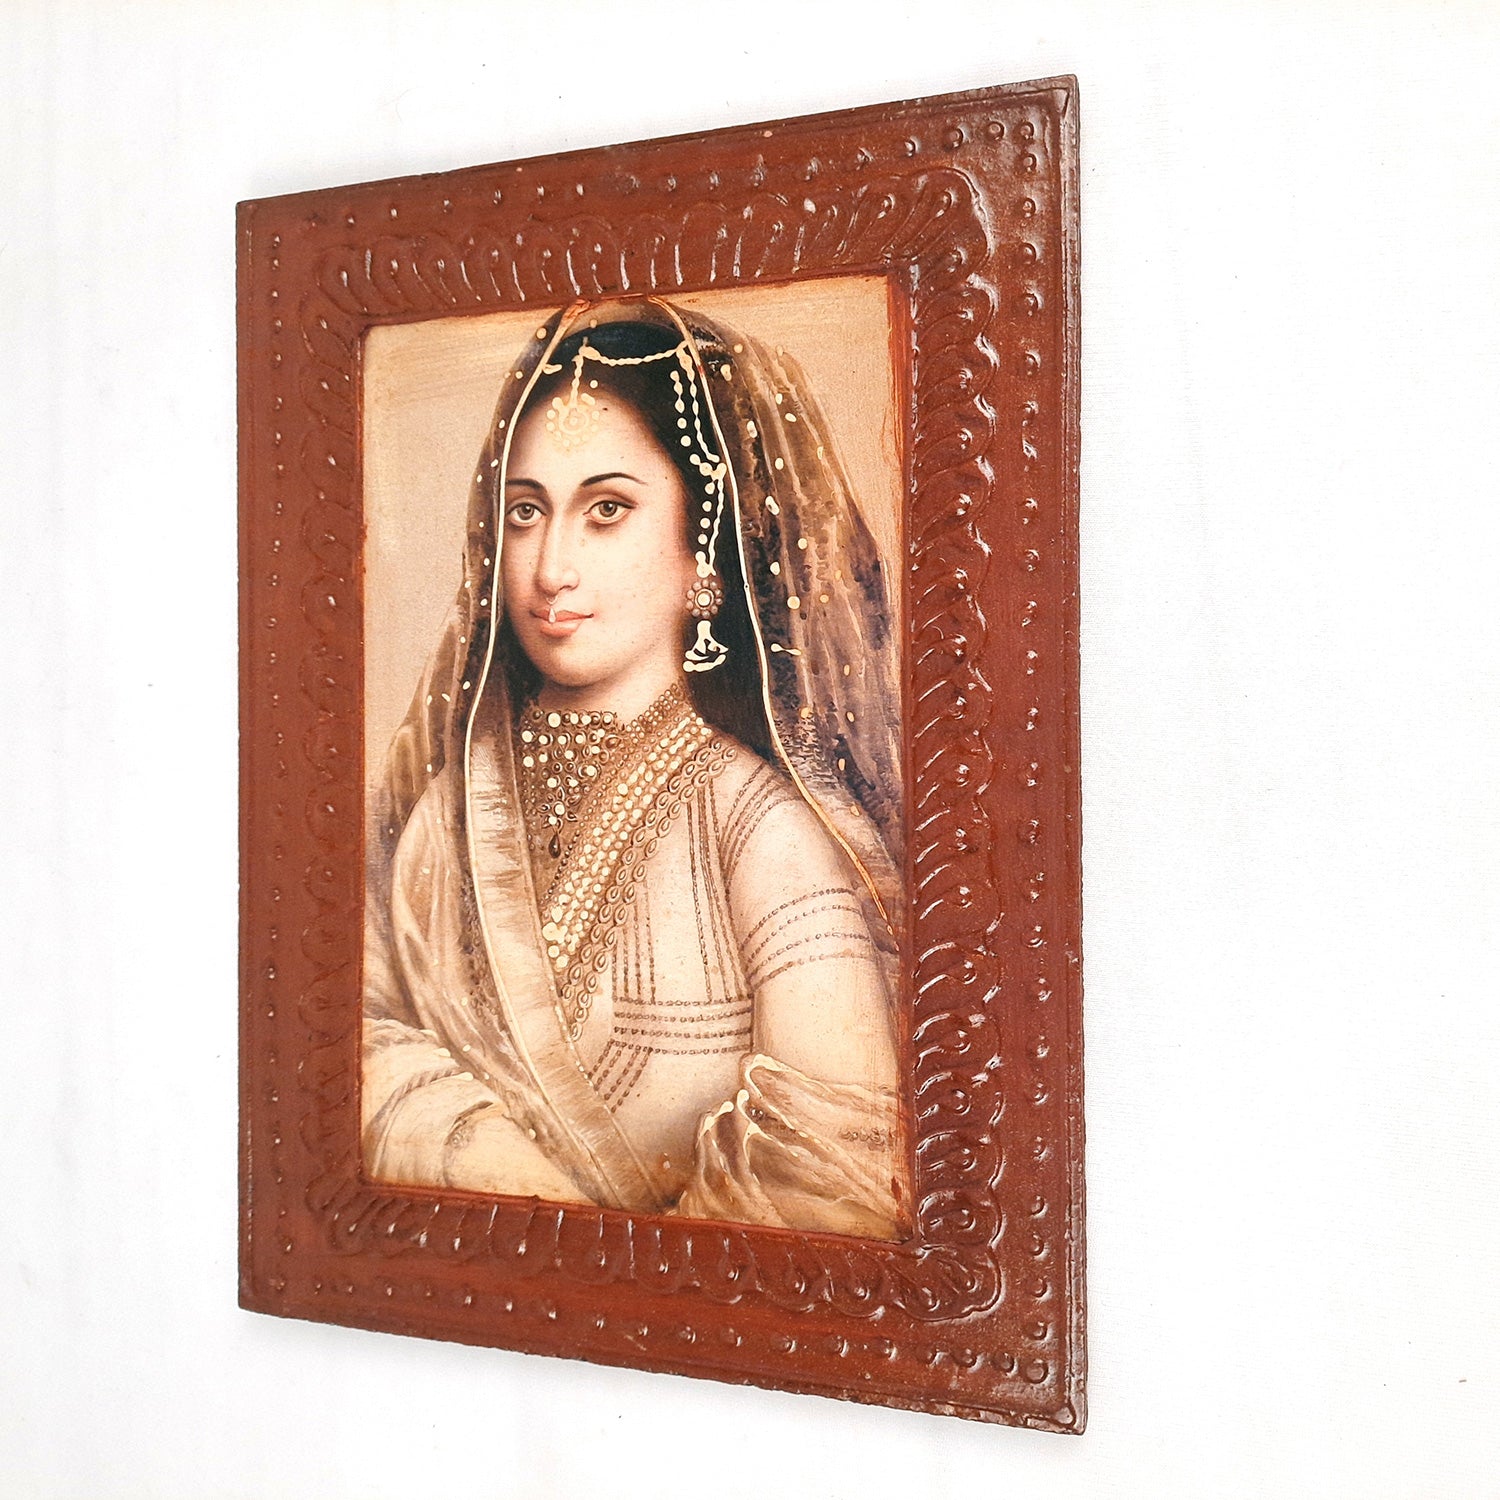 Wooden Framed Poster Wall Hanging - Traditional Lady Design - for Home, Paintings for Living Room, Bedroom, Hallway, Office Decor & Gifts - 12 Inch